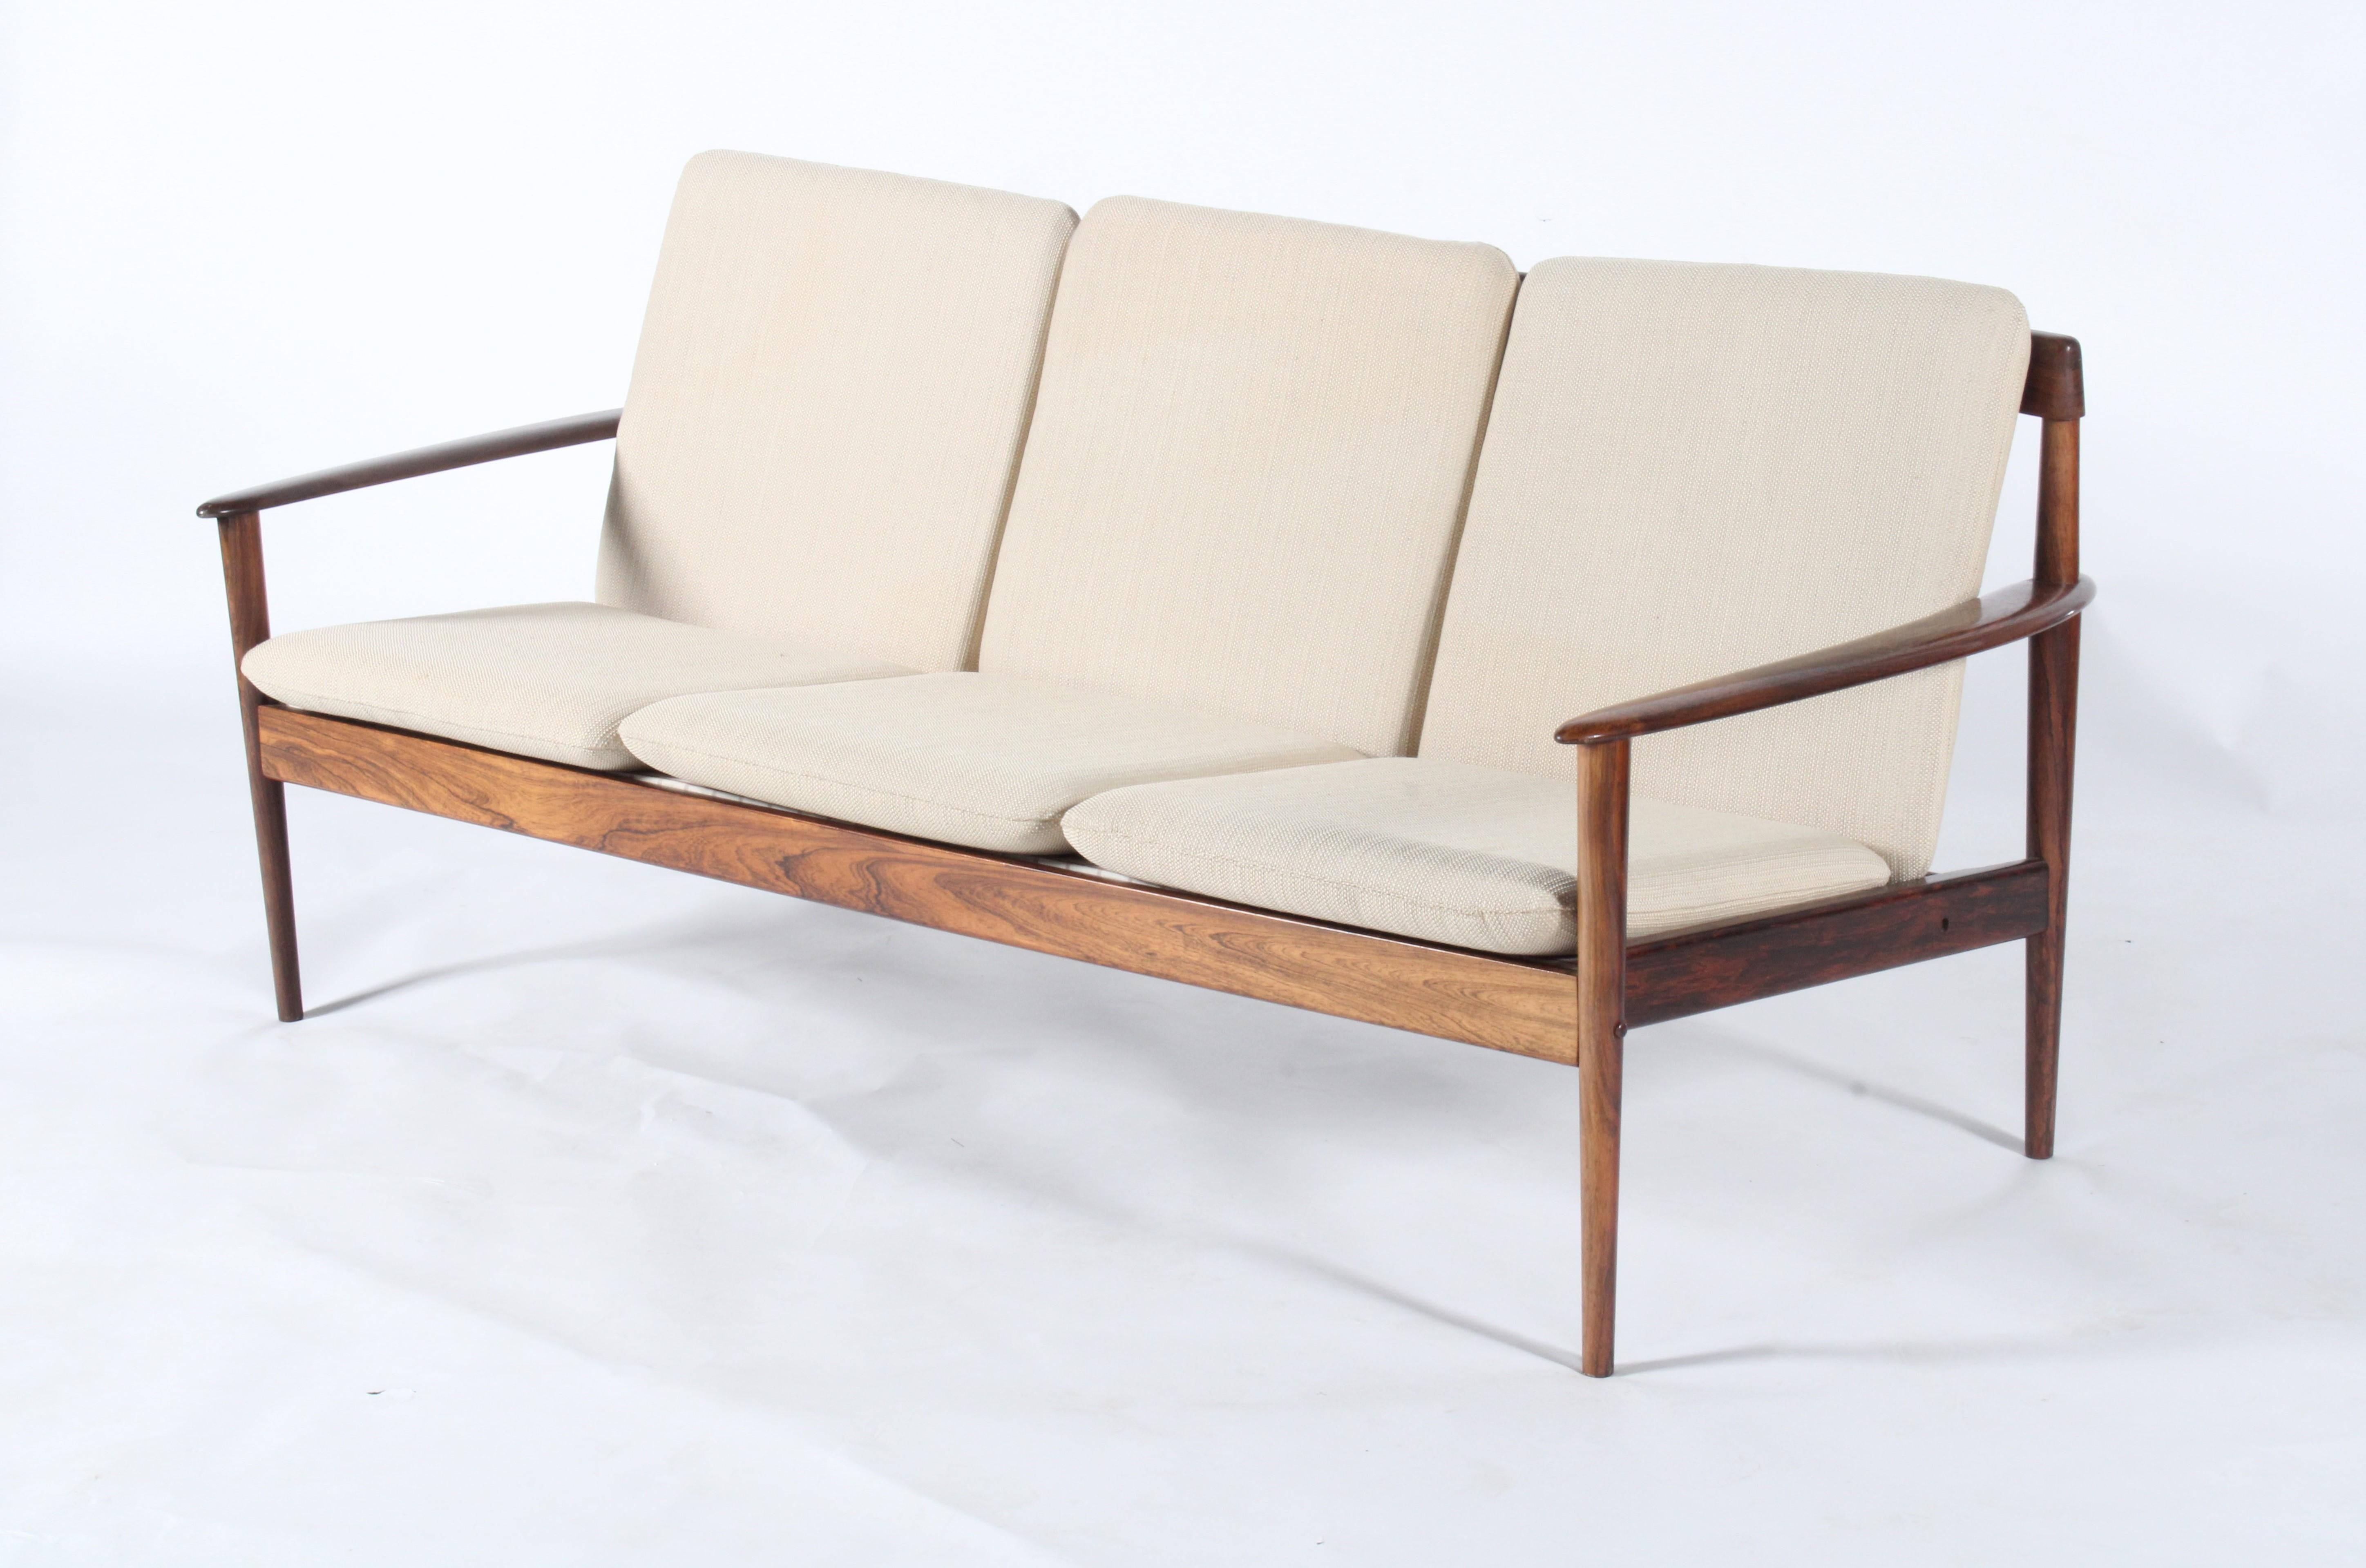 A stunningly beautiful sofa designed by the legendary Grete Jalk for Poul Jeppesen Mobelfabrik. Exceedingly rare in rosewood this piece has remarkable grain pattern and is presented in superb original vintage condition. A beautifully simple design